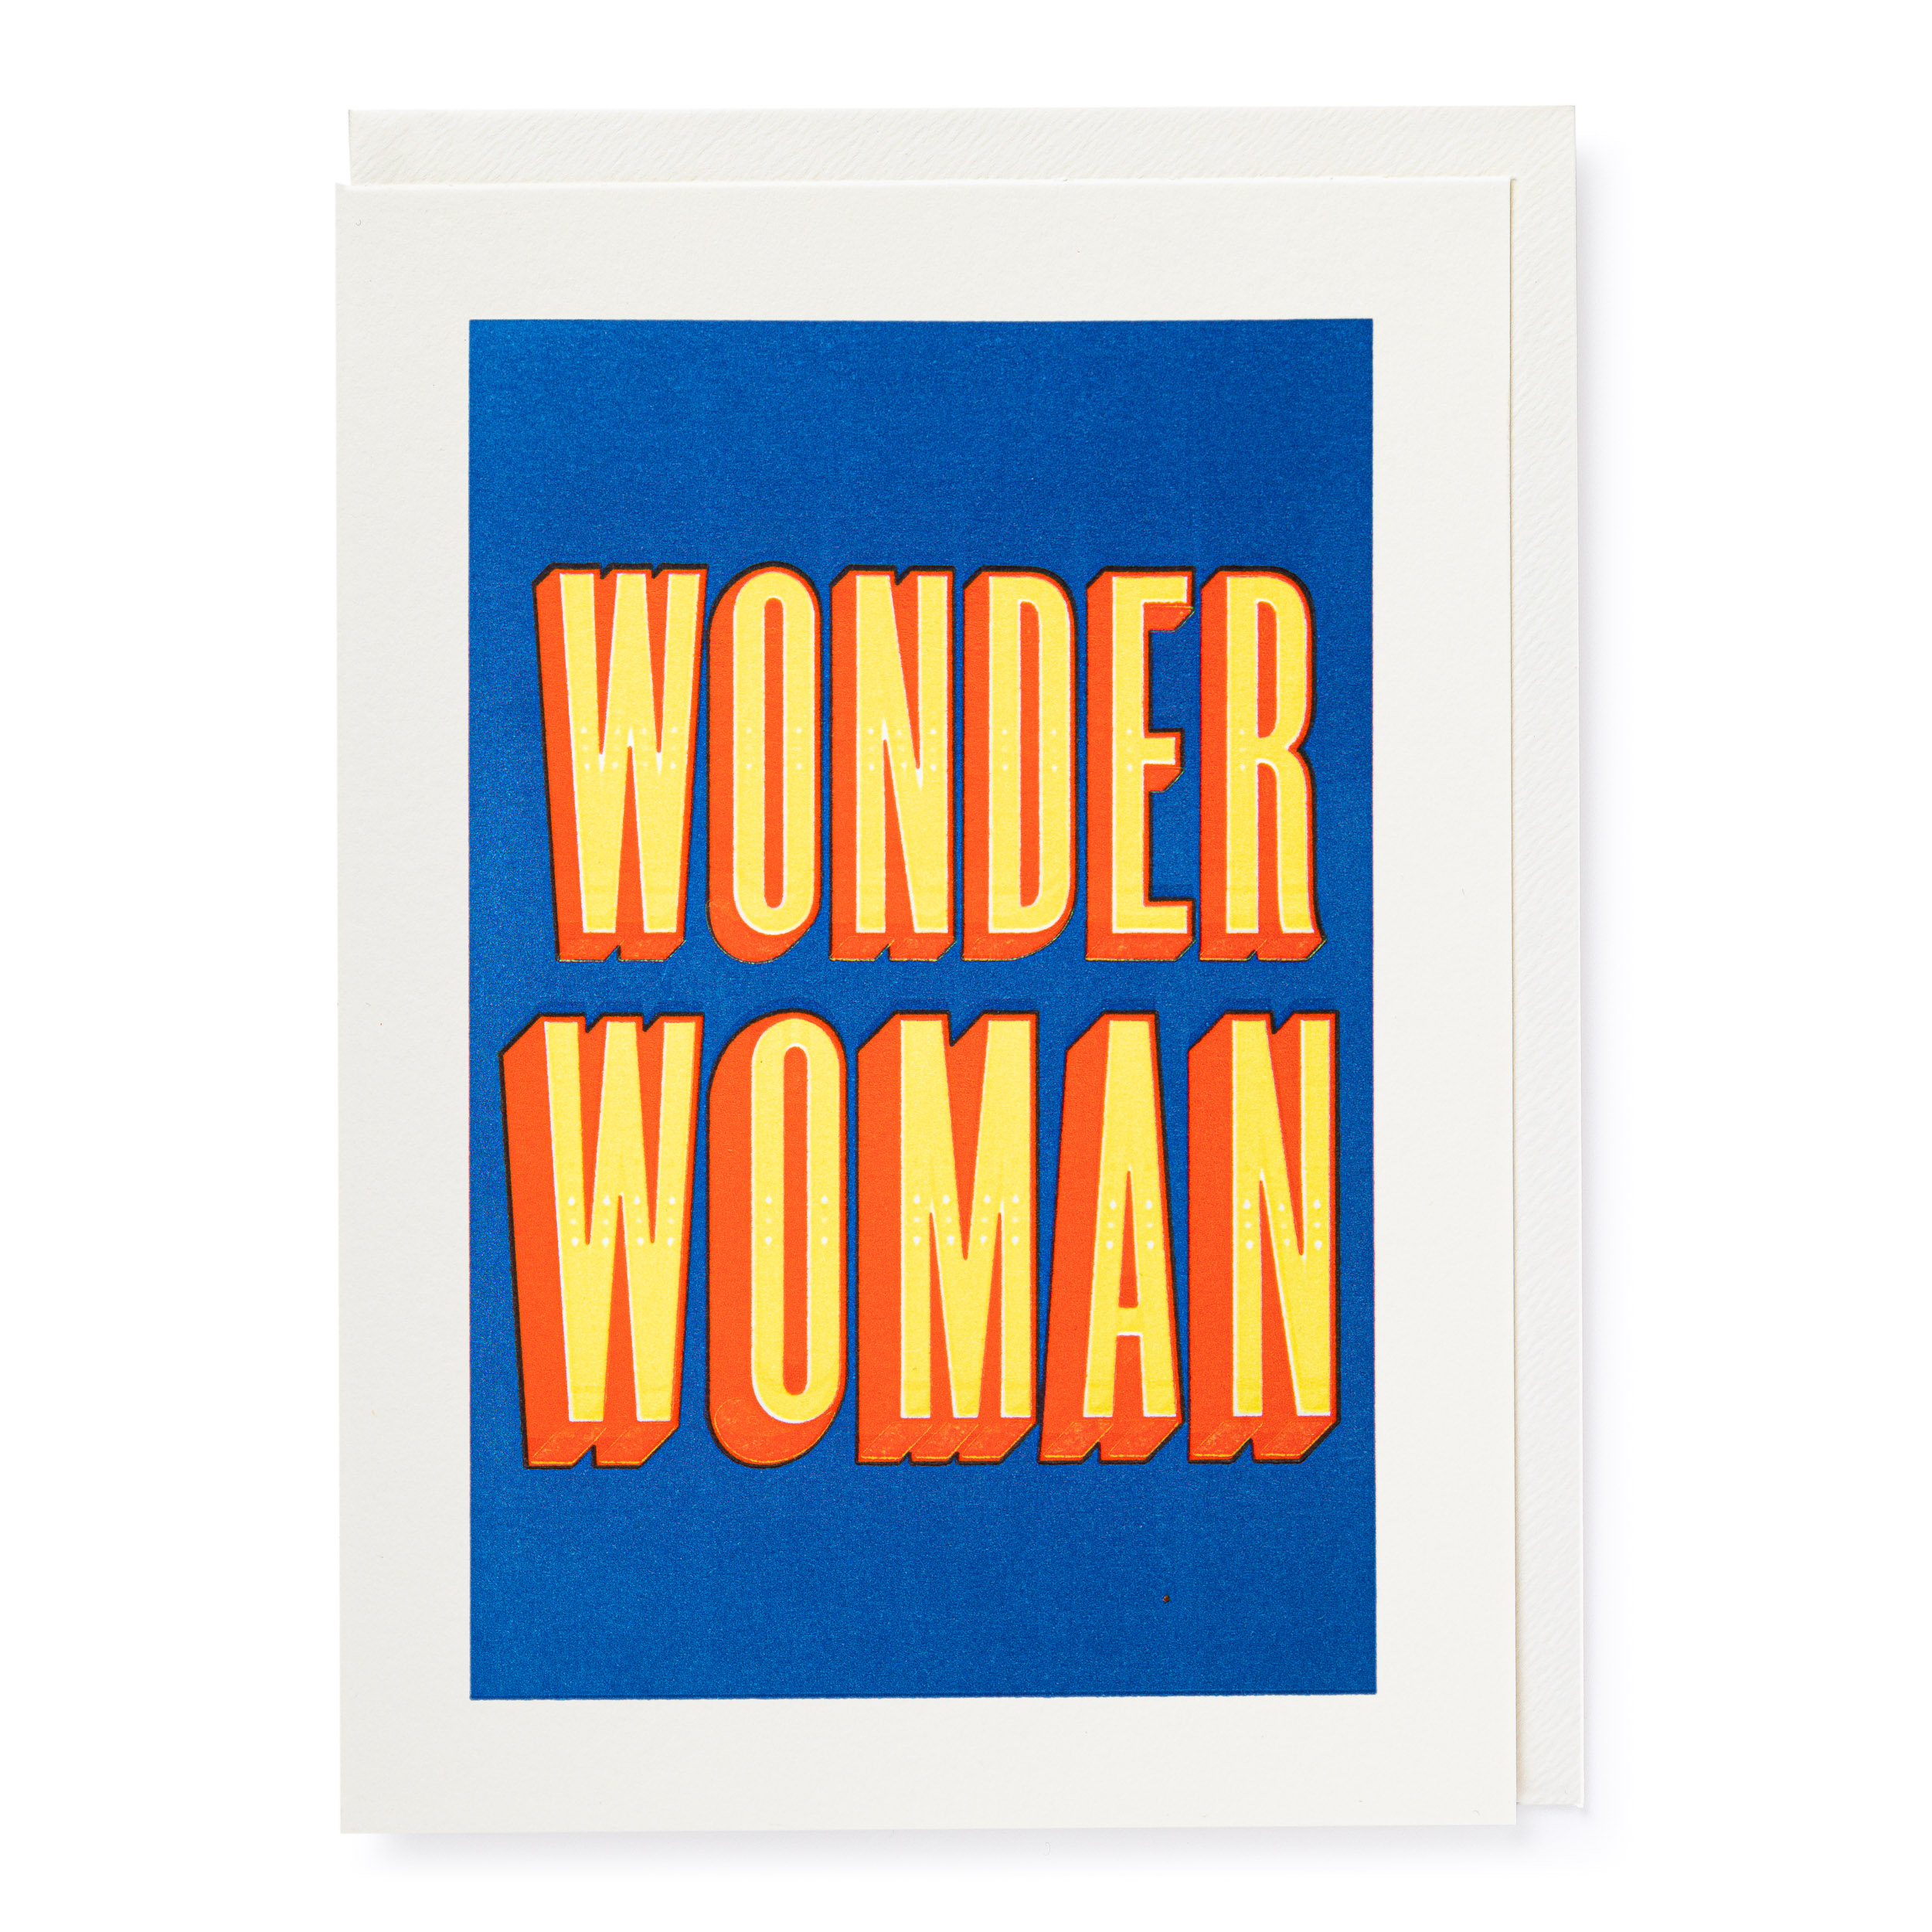 Wonder woman - Letterpress Cards - Thomas Mayo - from Archivist Gallery 